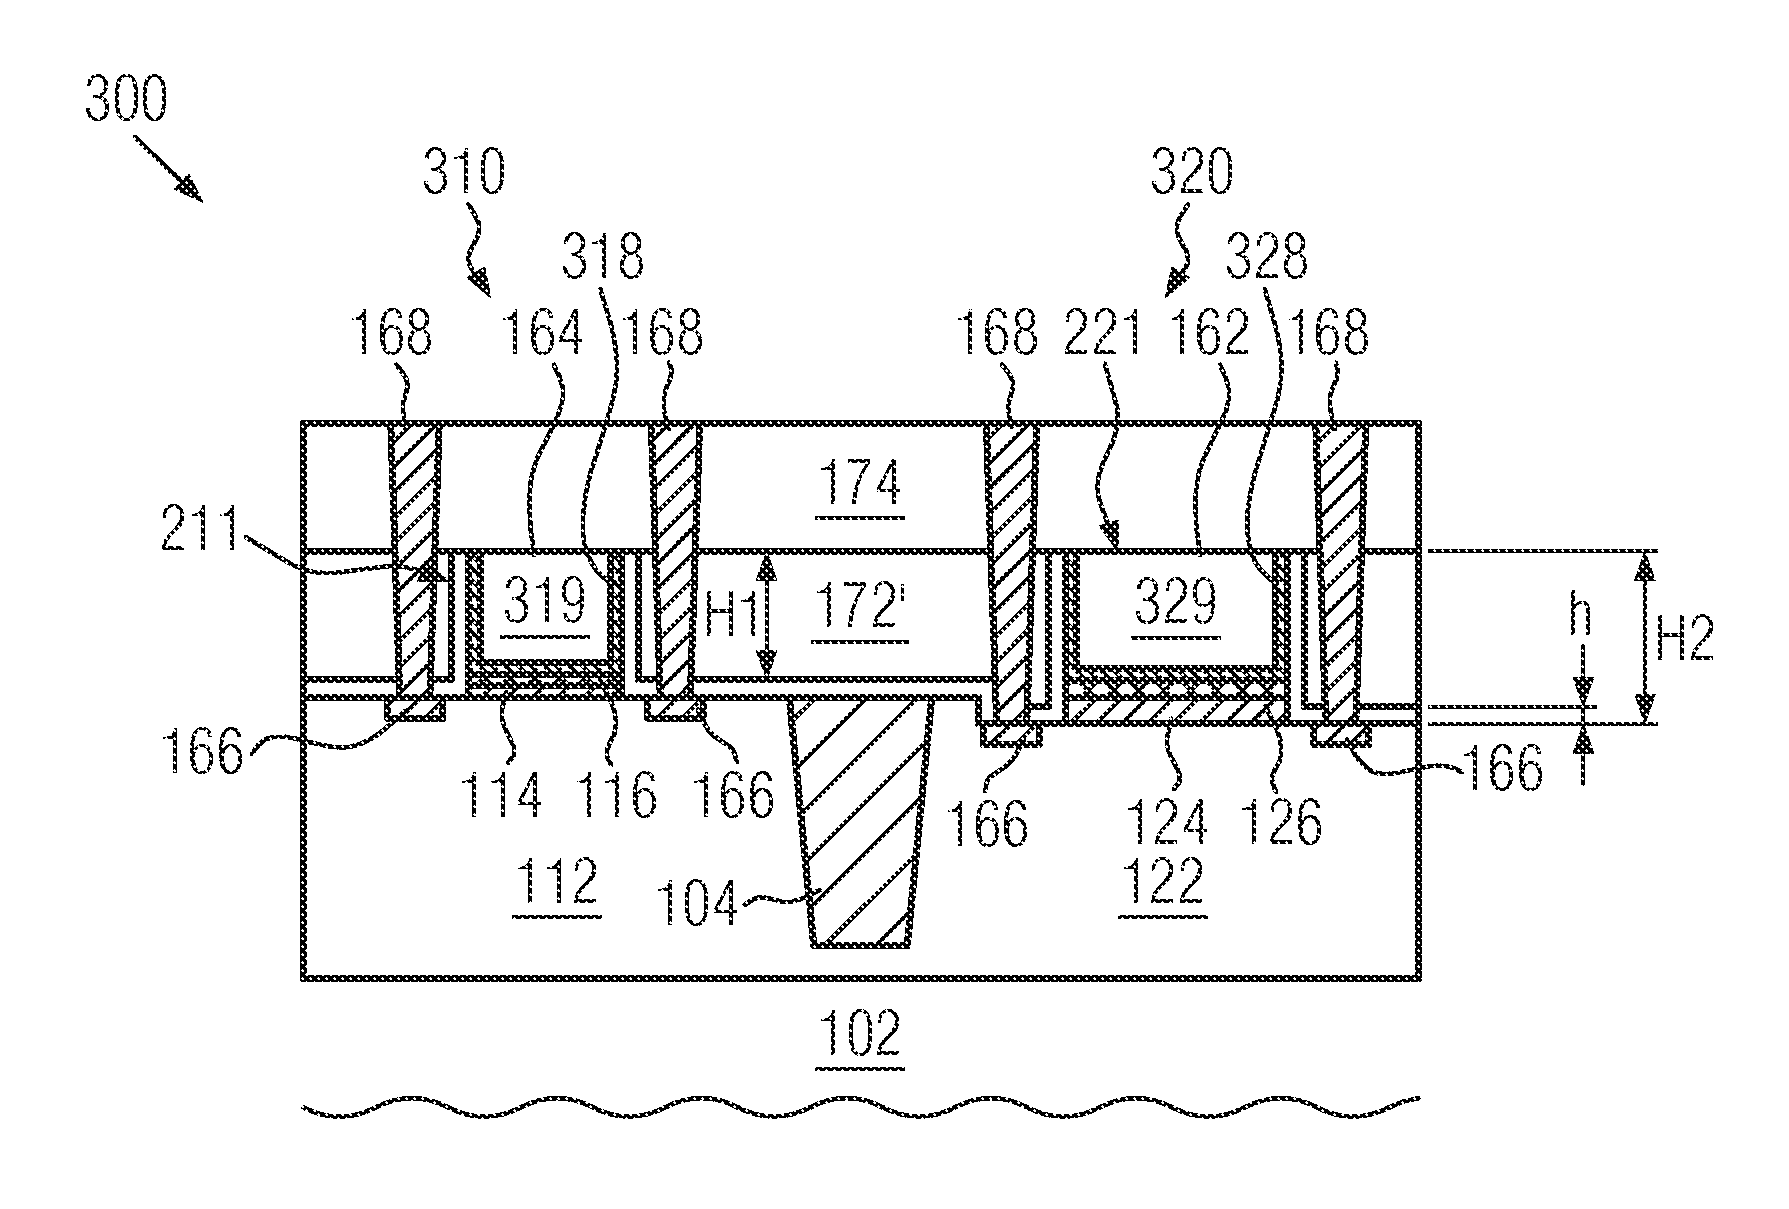 Methods of forming a semiconductor circuit element and semiconductor circuit element